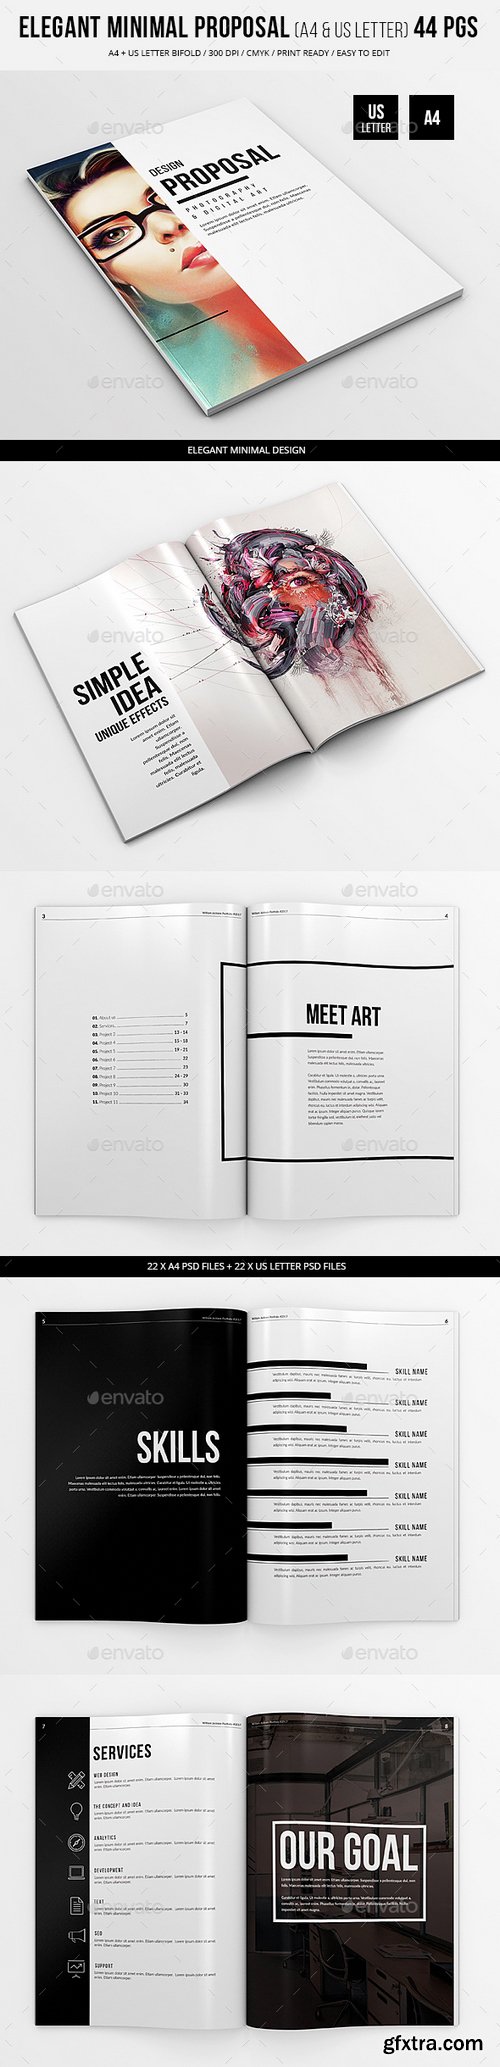 Graphicriver - Elegant Minimal Proposal - 44 pgs - A4 and US Letter 20076300